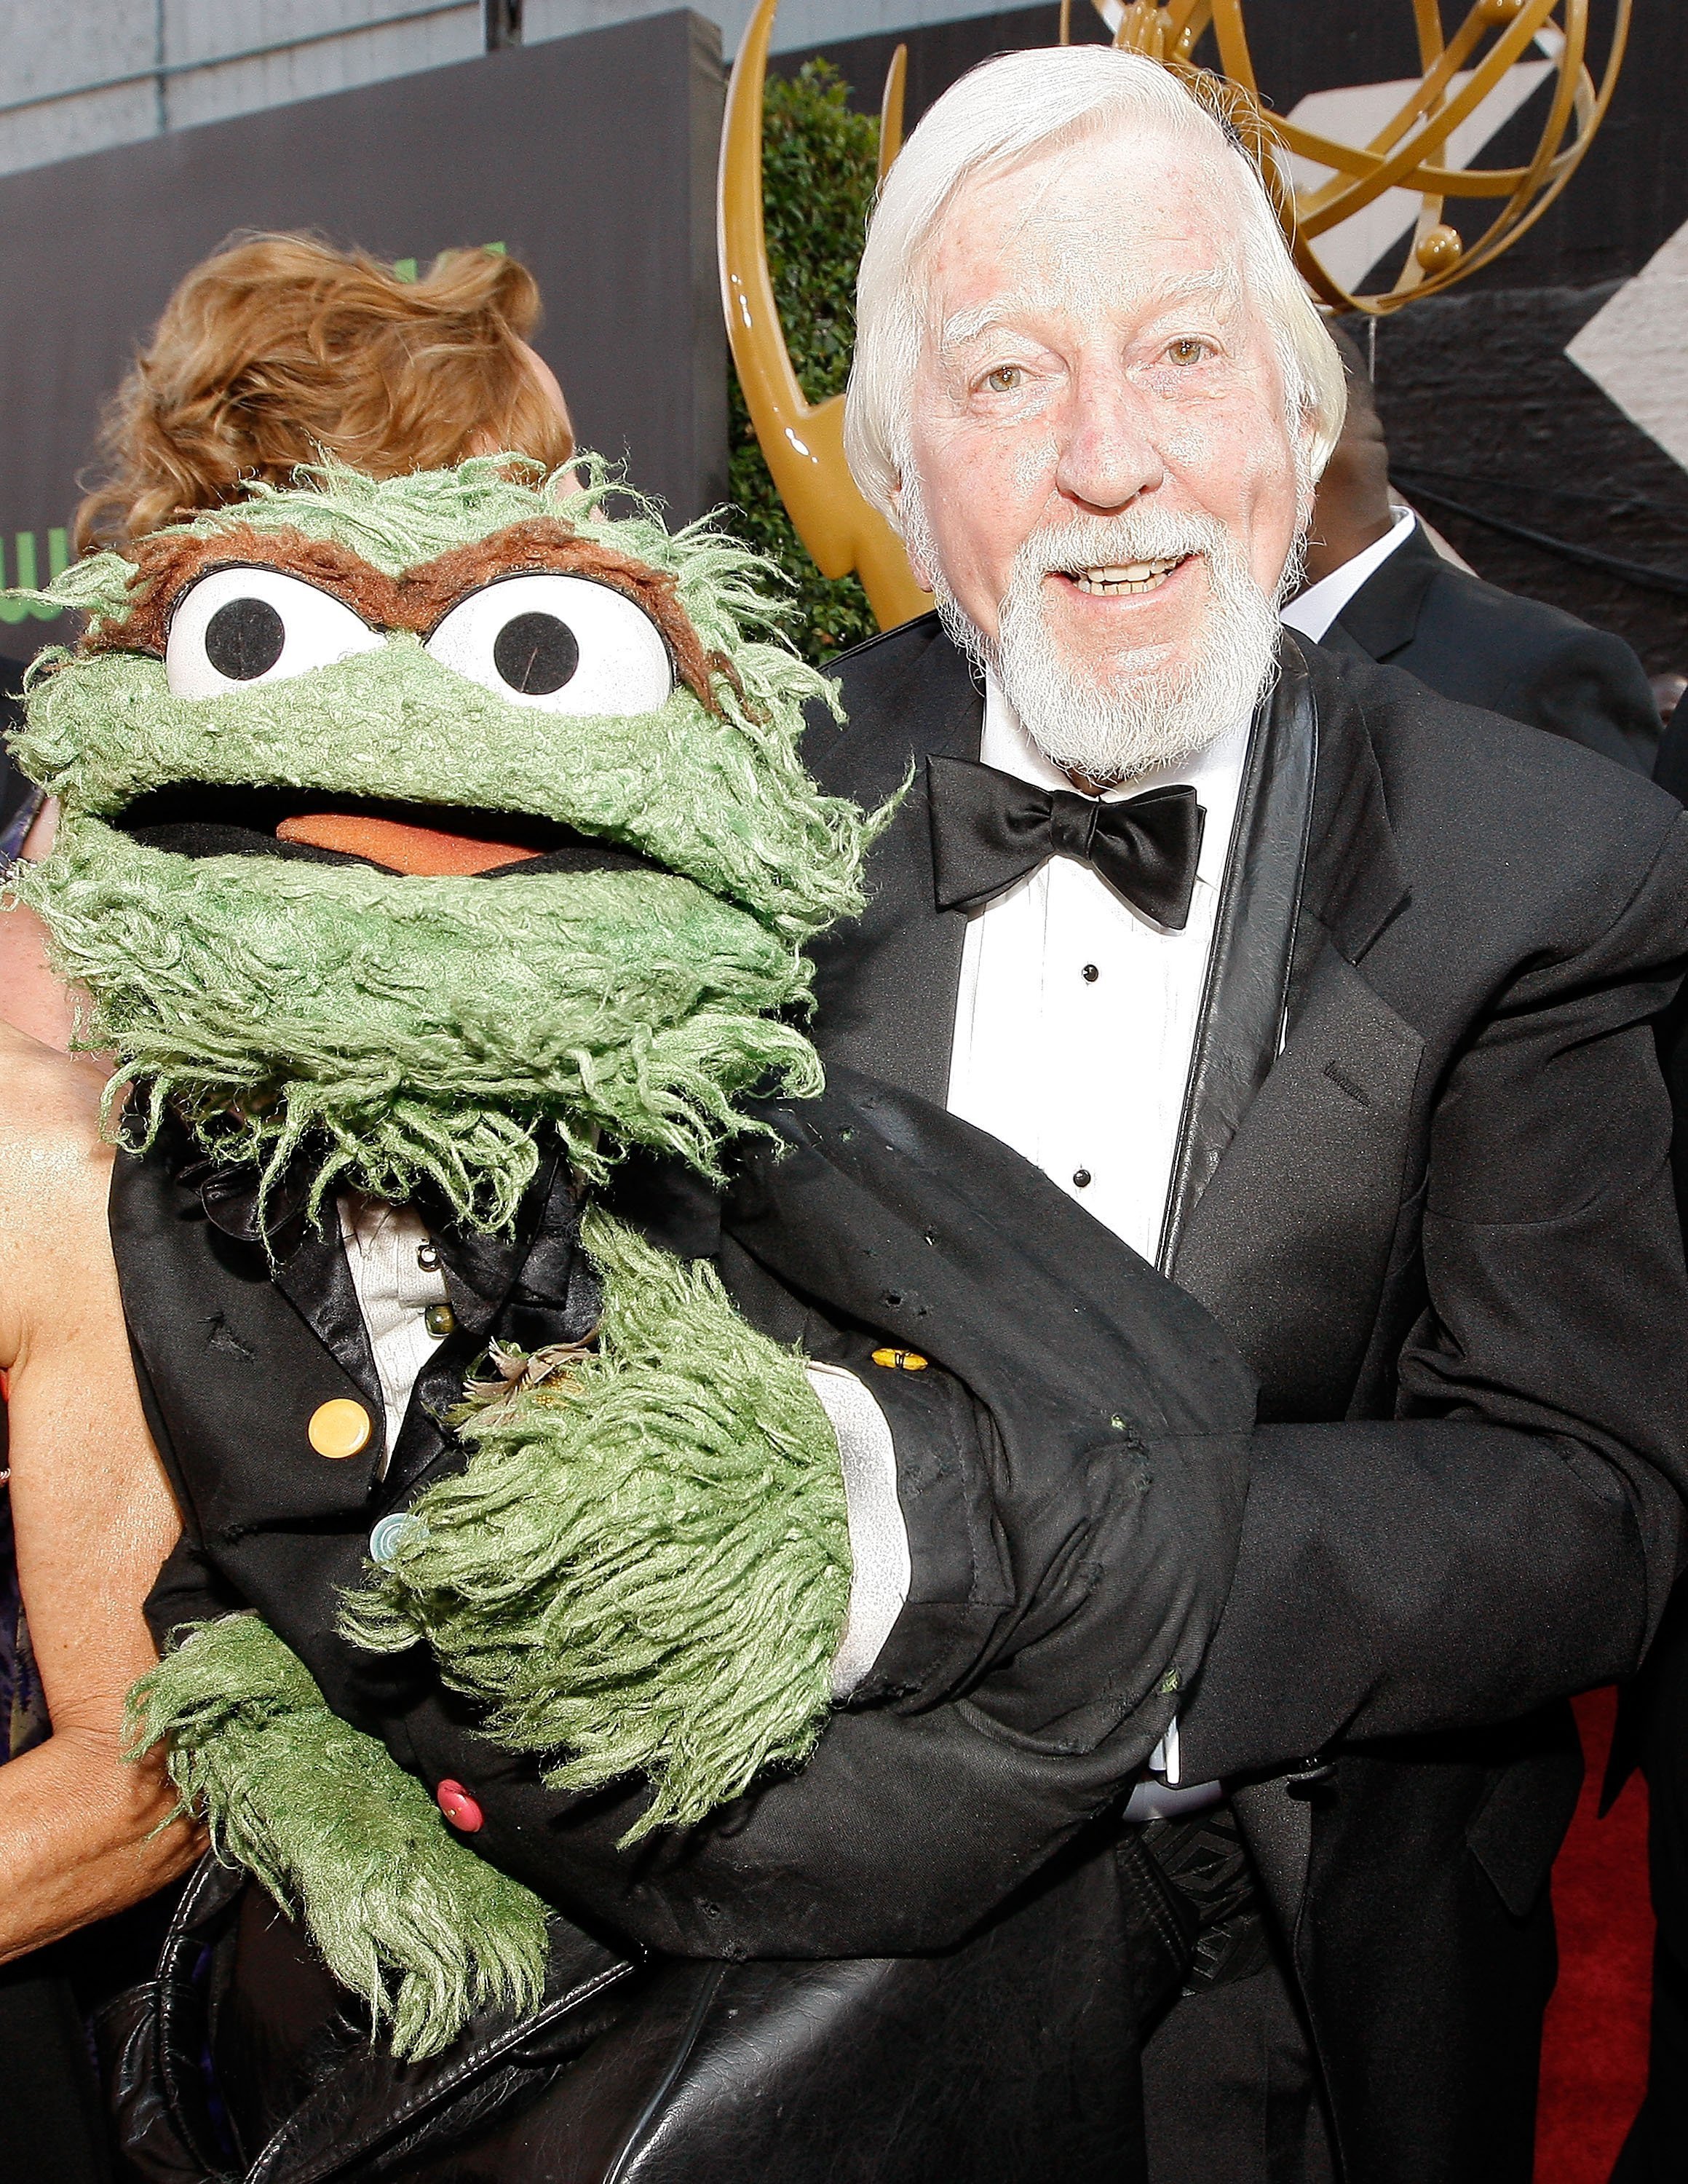 Caroll Spinney at the 36th Annual Daytime Emmy Awards at The Orpheum Theater in Los Angeles, California | Photo: Chris Polk/DE/Getty Images for ATI